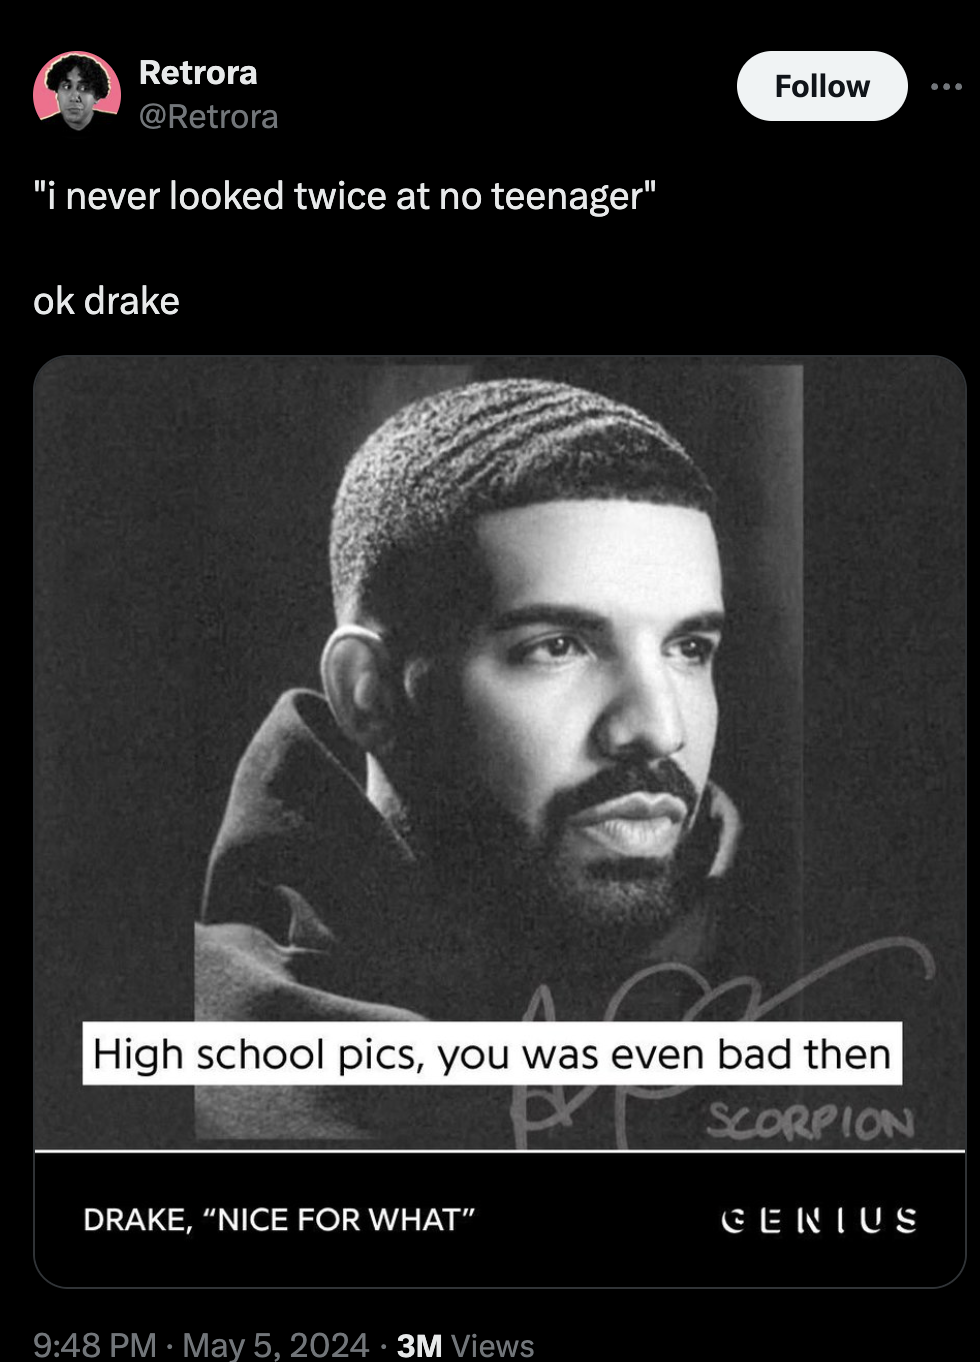 scorpion album cover color - Retrora "i never looked twice at no teenager" ok drake High school pics, you was even bad then Drake, "Nice For What" 3M Views Scorpion Genius